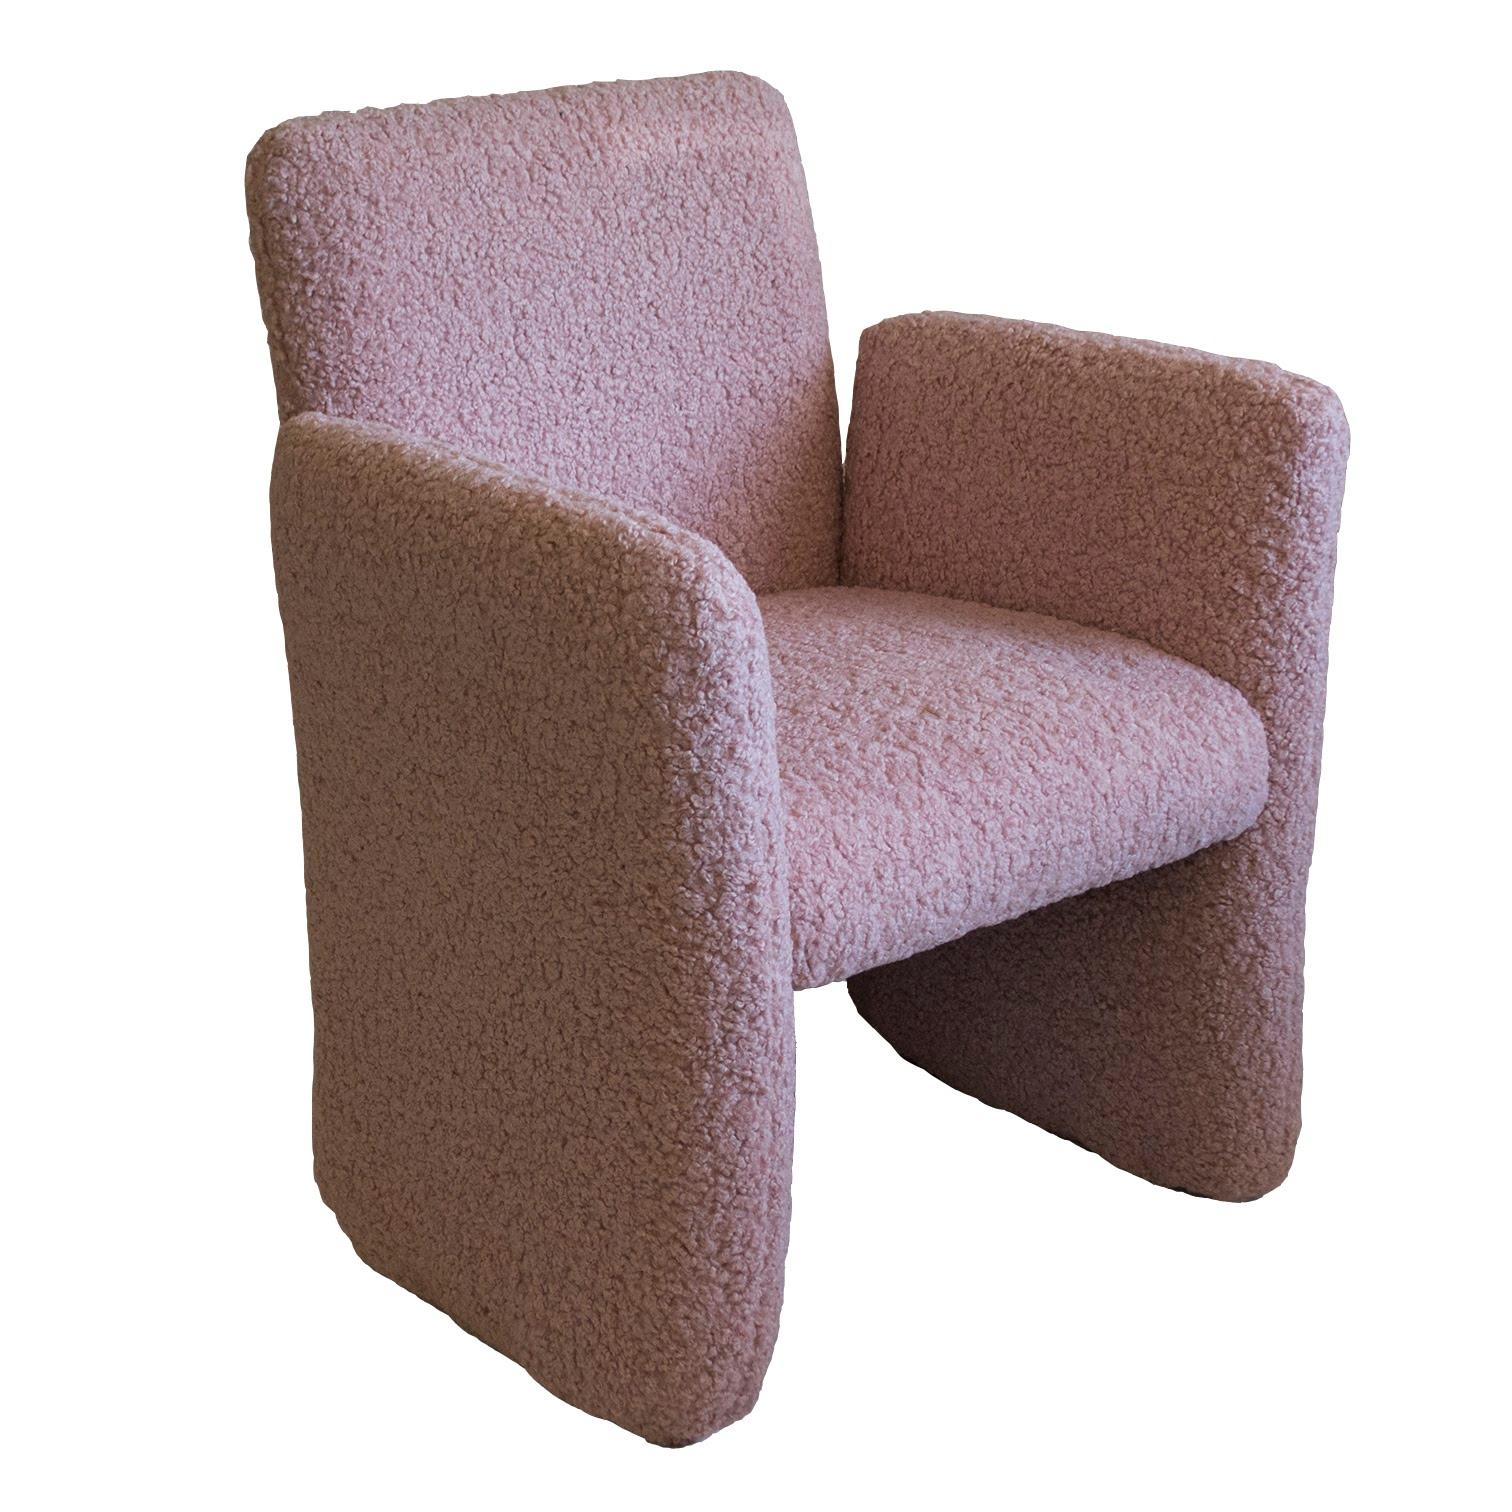 Woodwork Pair of Chiclet Chairs in Blush Pink Faux Shearling/ Boucle, a pair